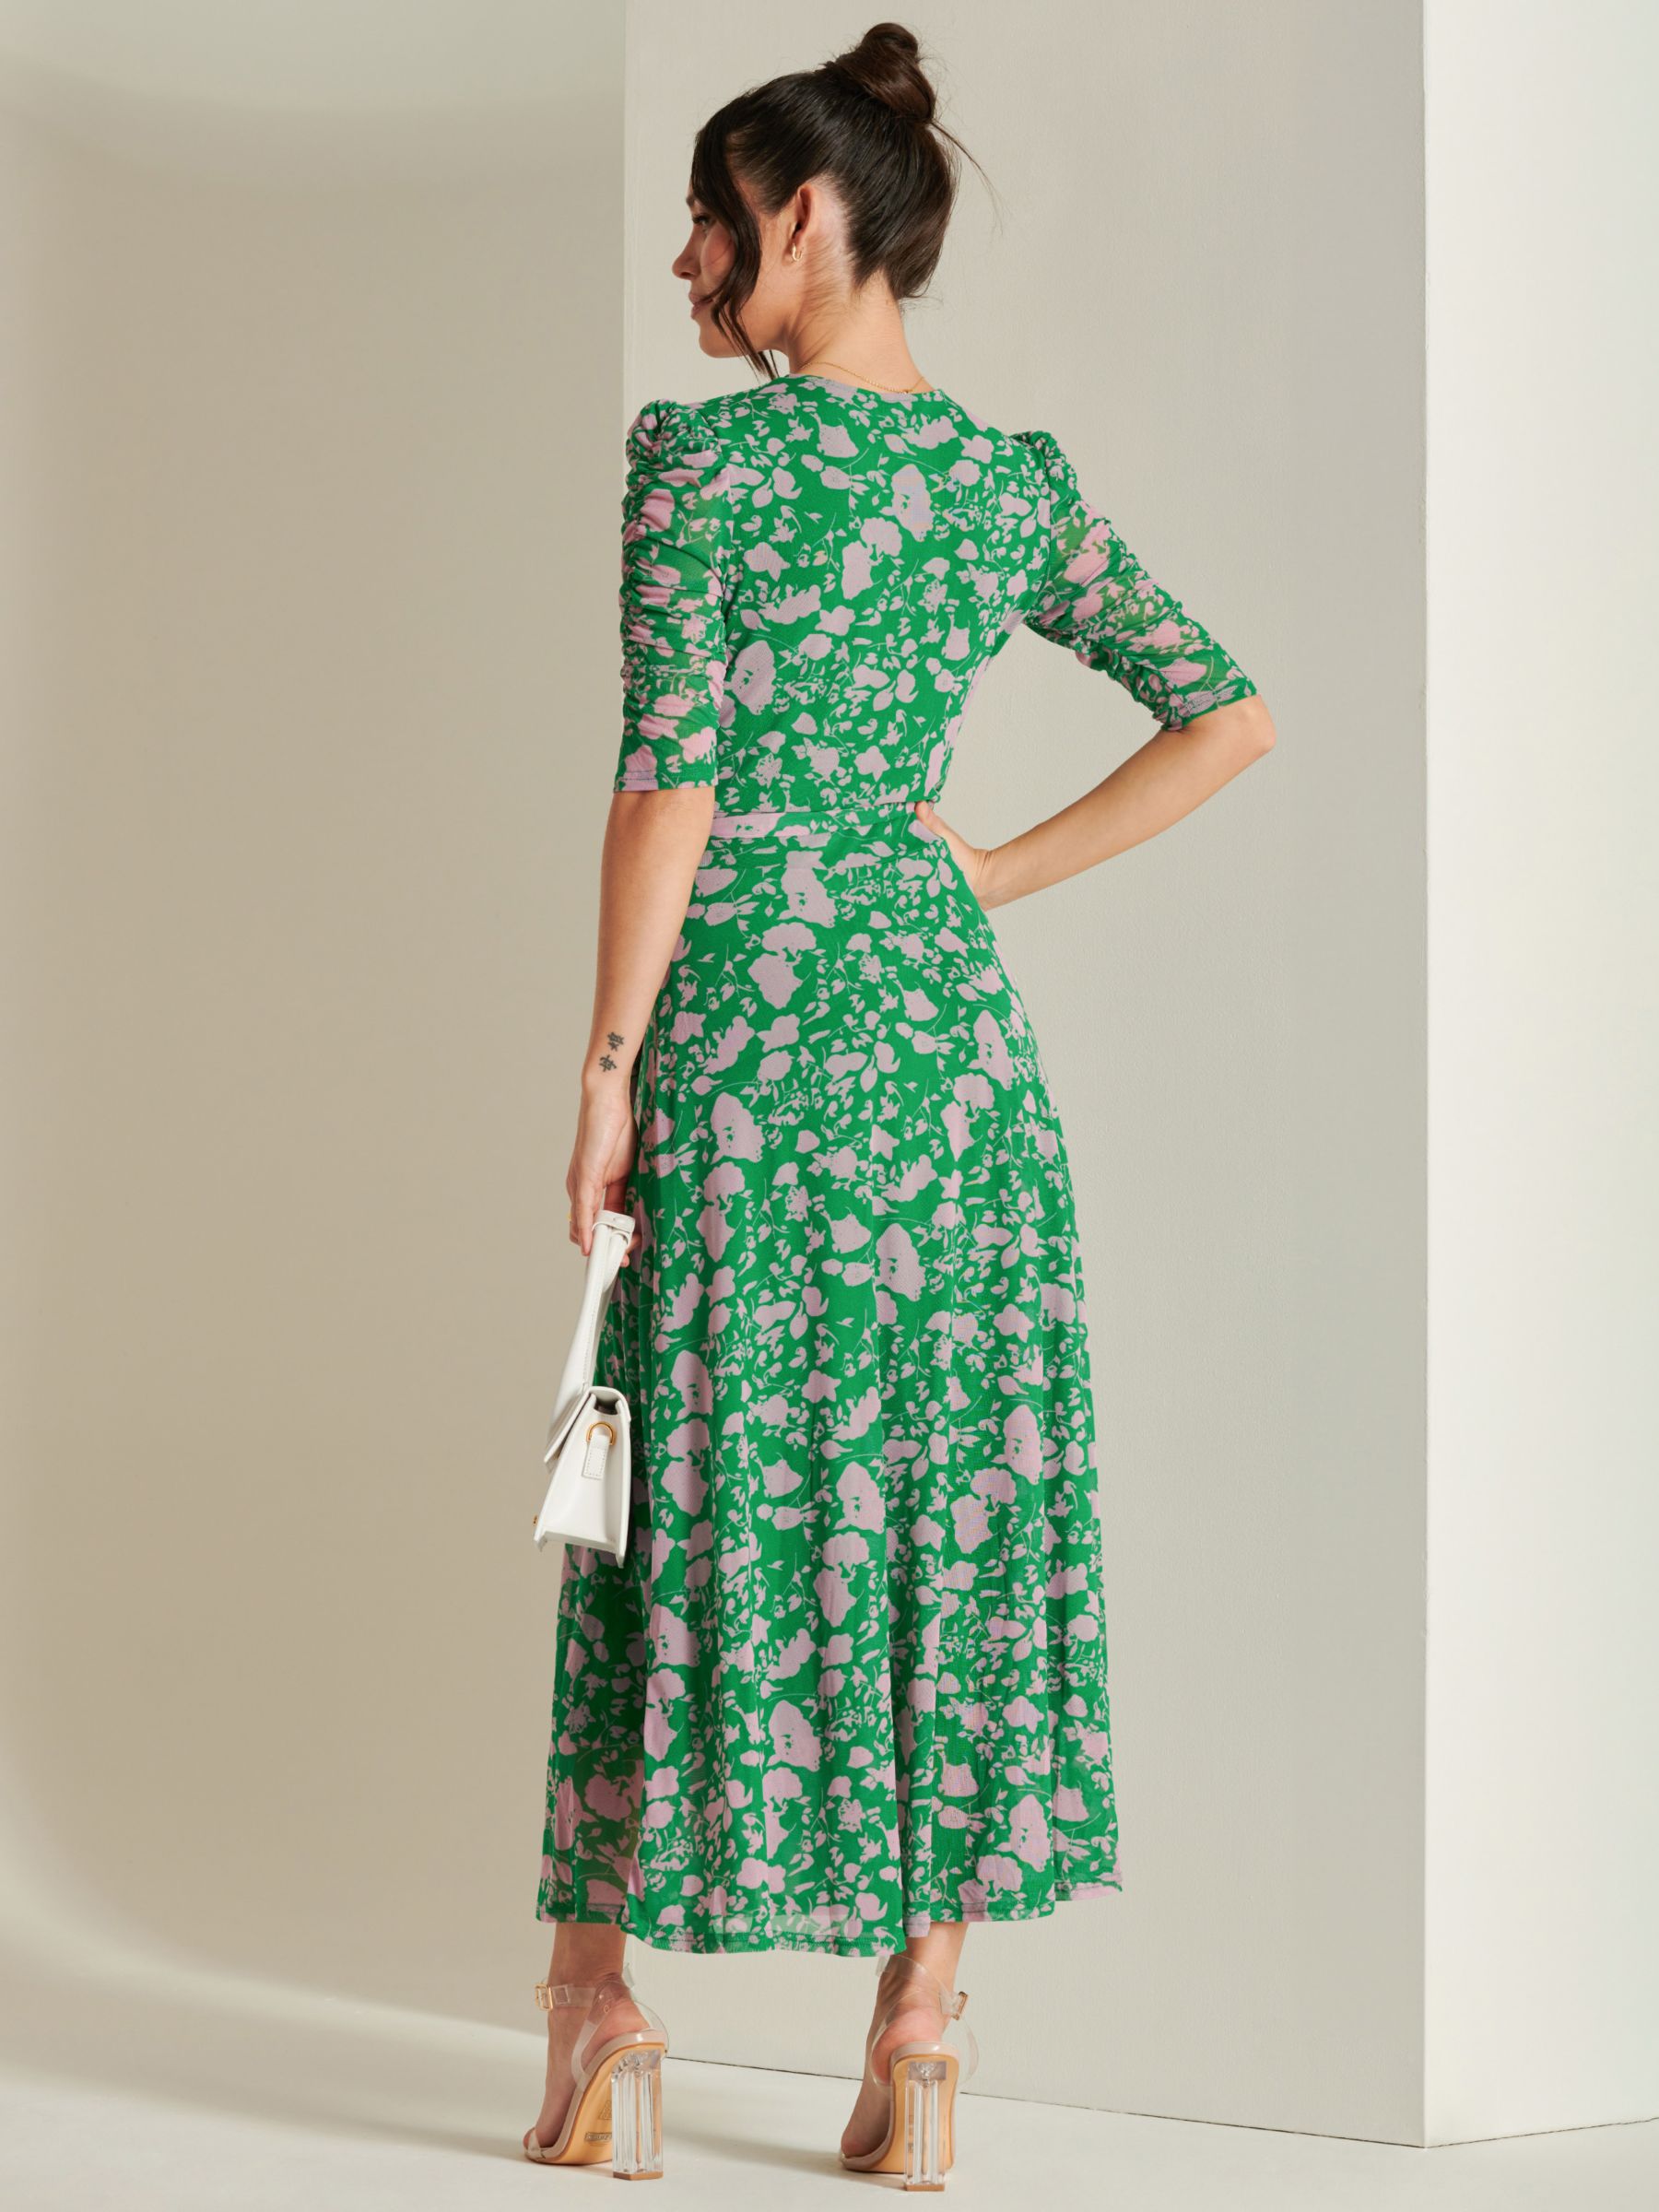 Buy Jolie Moi Wrapped Mesh Maxi Dress, Green Floral Online at johnlewis.com